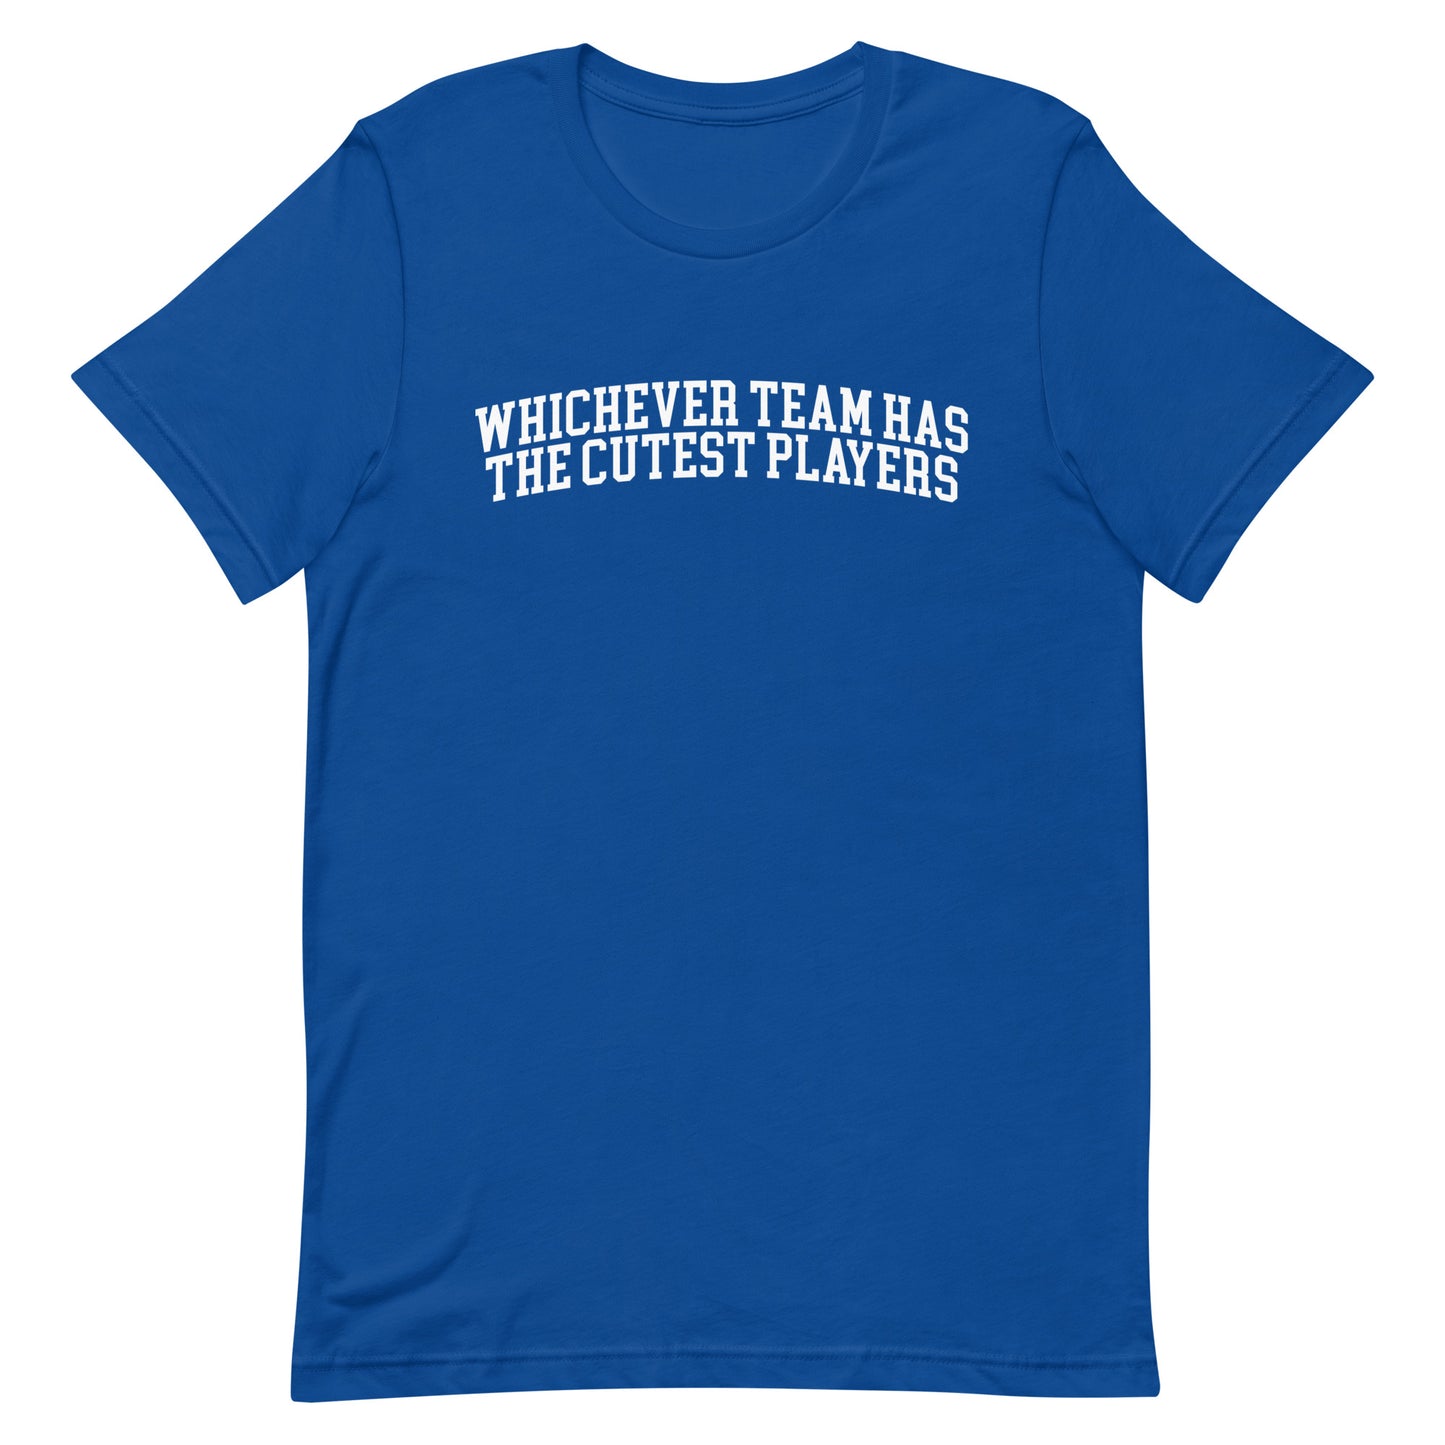 Whichever Team Has the Cutest Players Unisex t-shirt